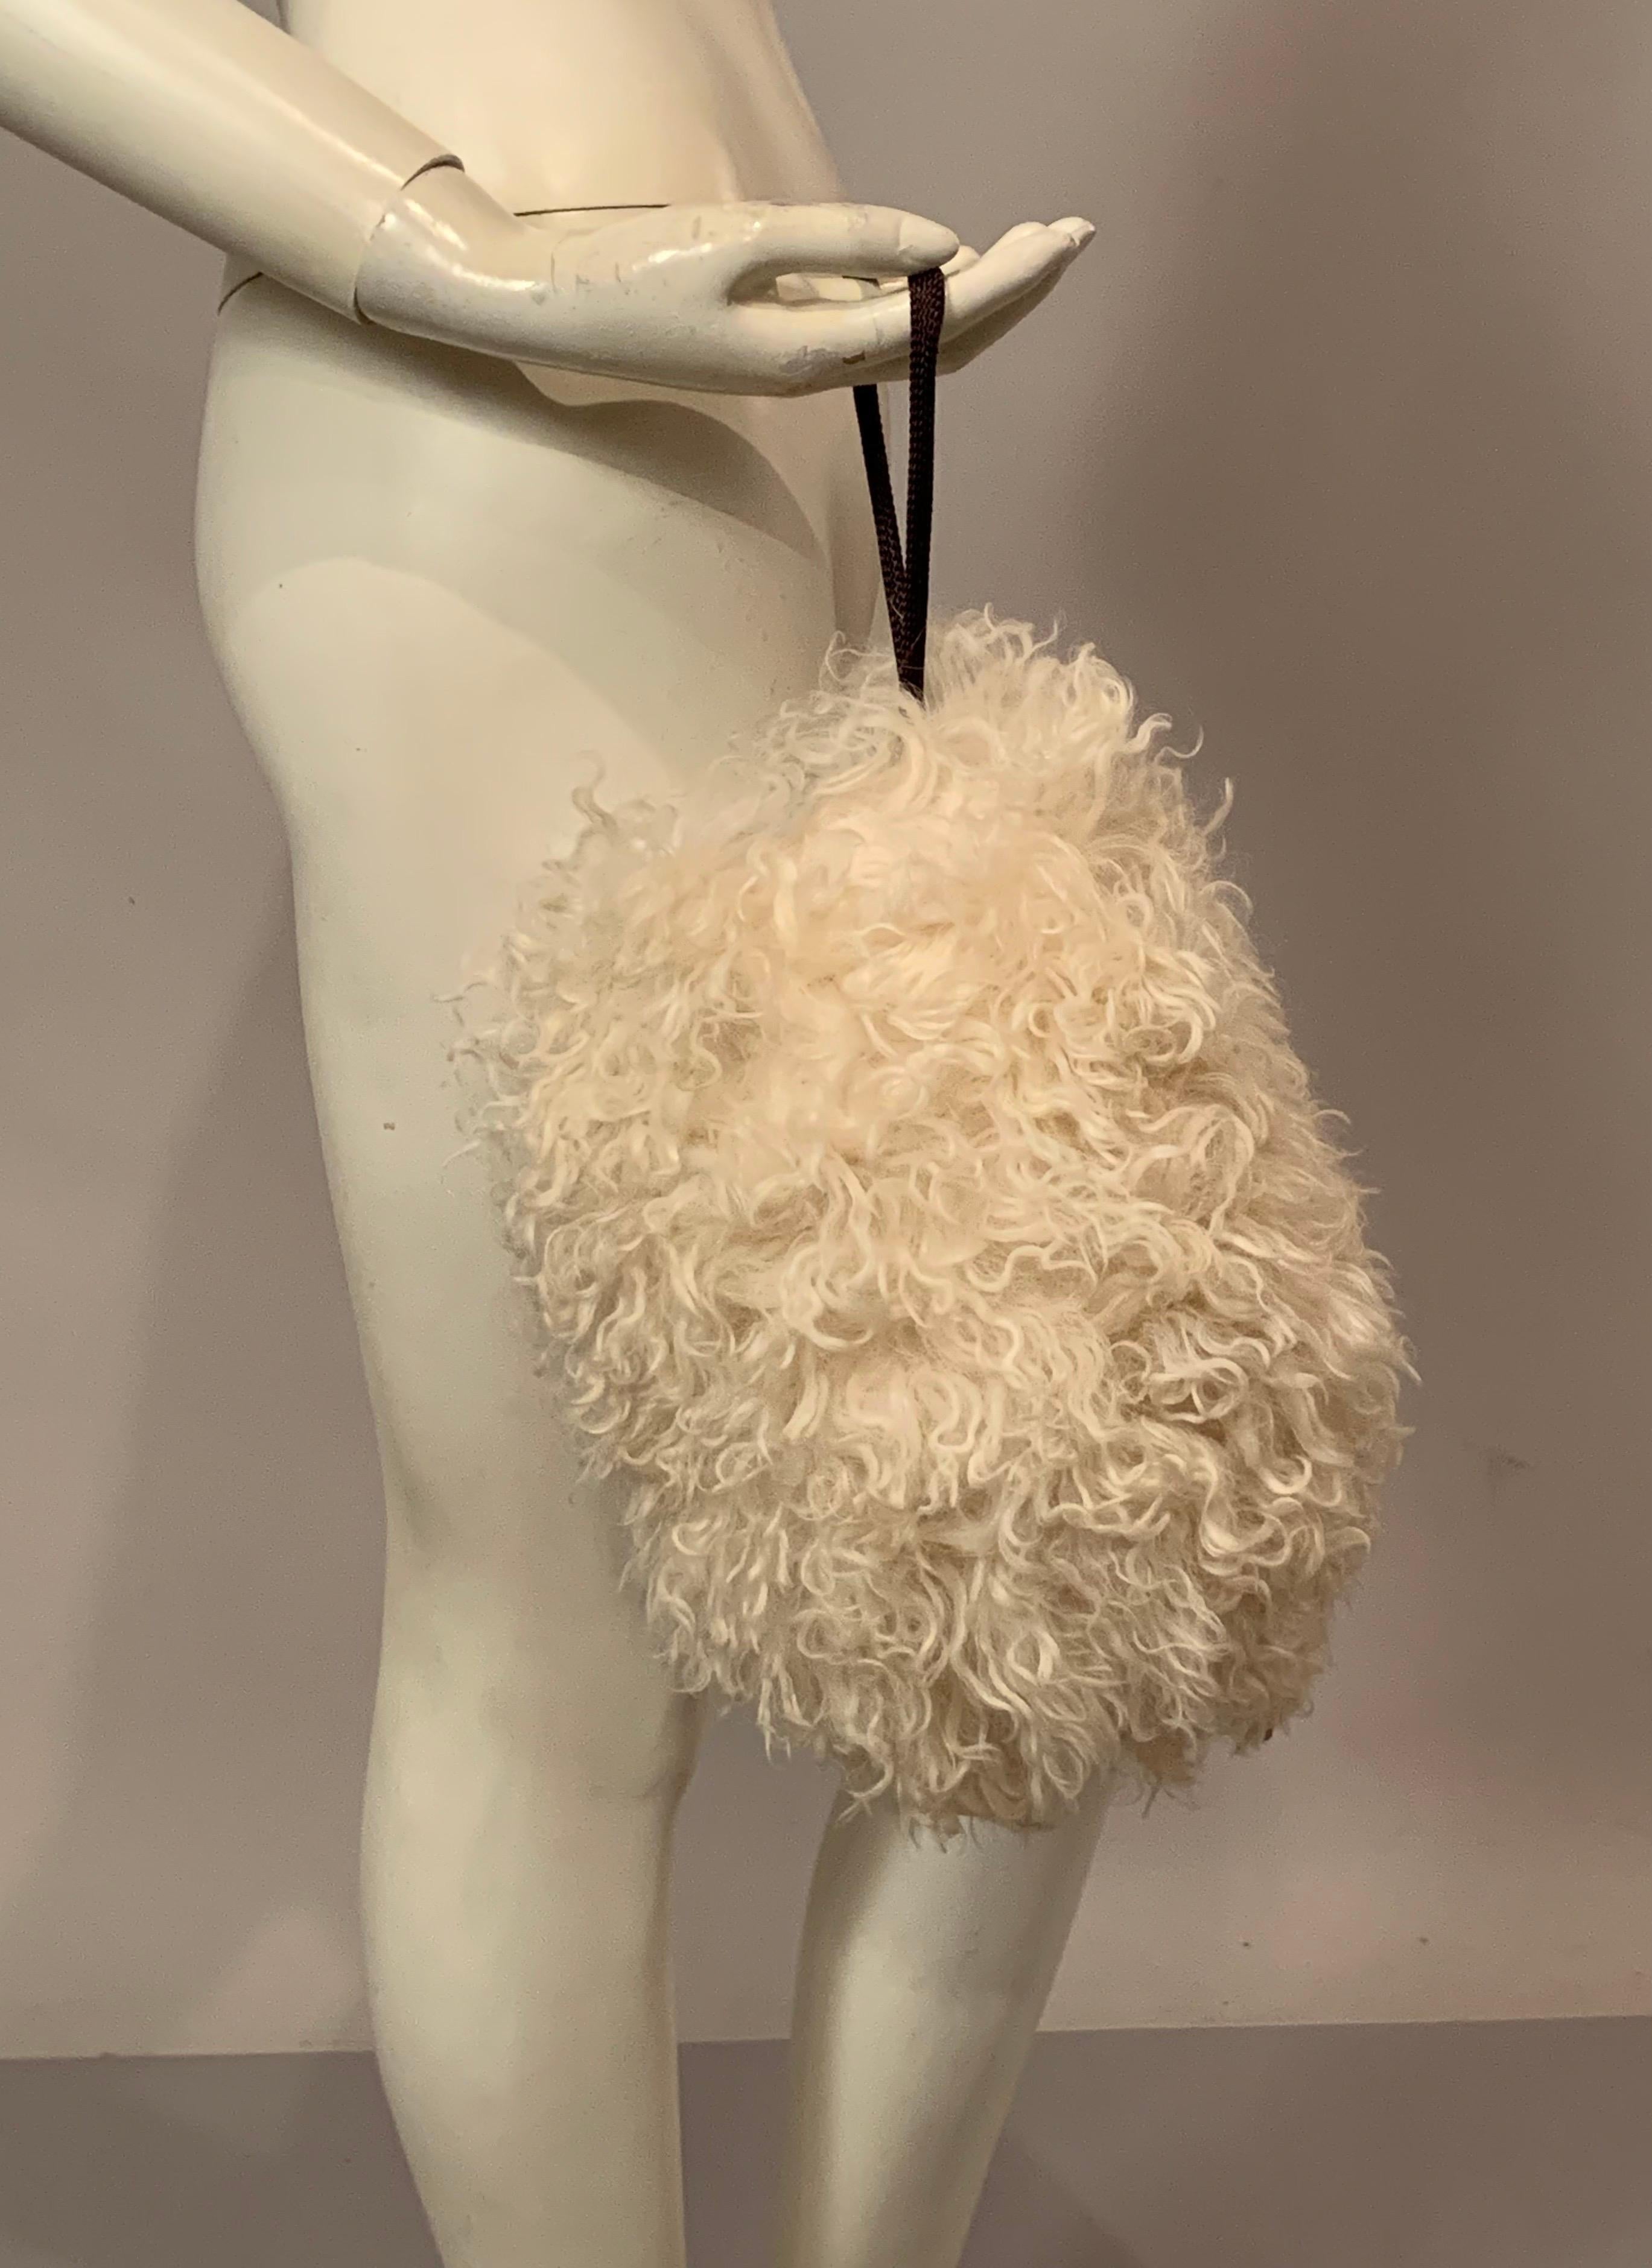 Add a little glamour to these cold weather days! This lovely Mongolian curly lamb muff is just the thing to keep your hands warm in style. The muff is lined with chocolate brown satin and there is a zippered pocket inside as well as a wrist strap.